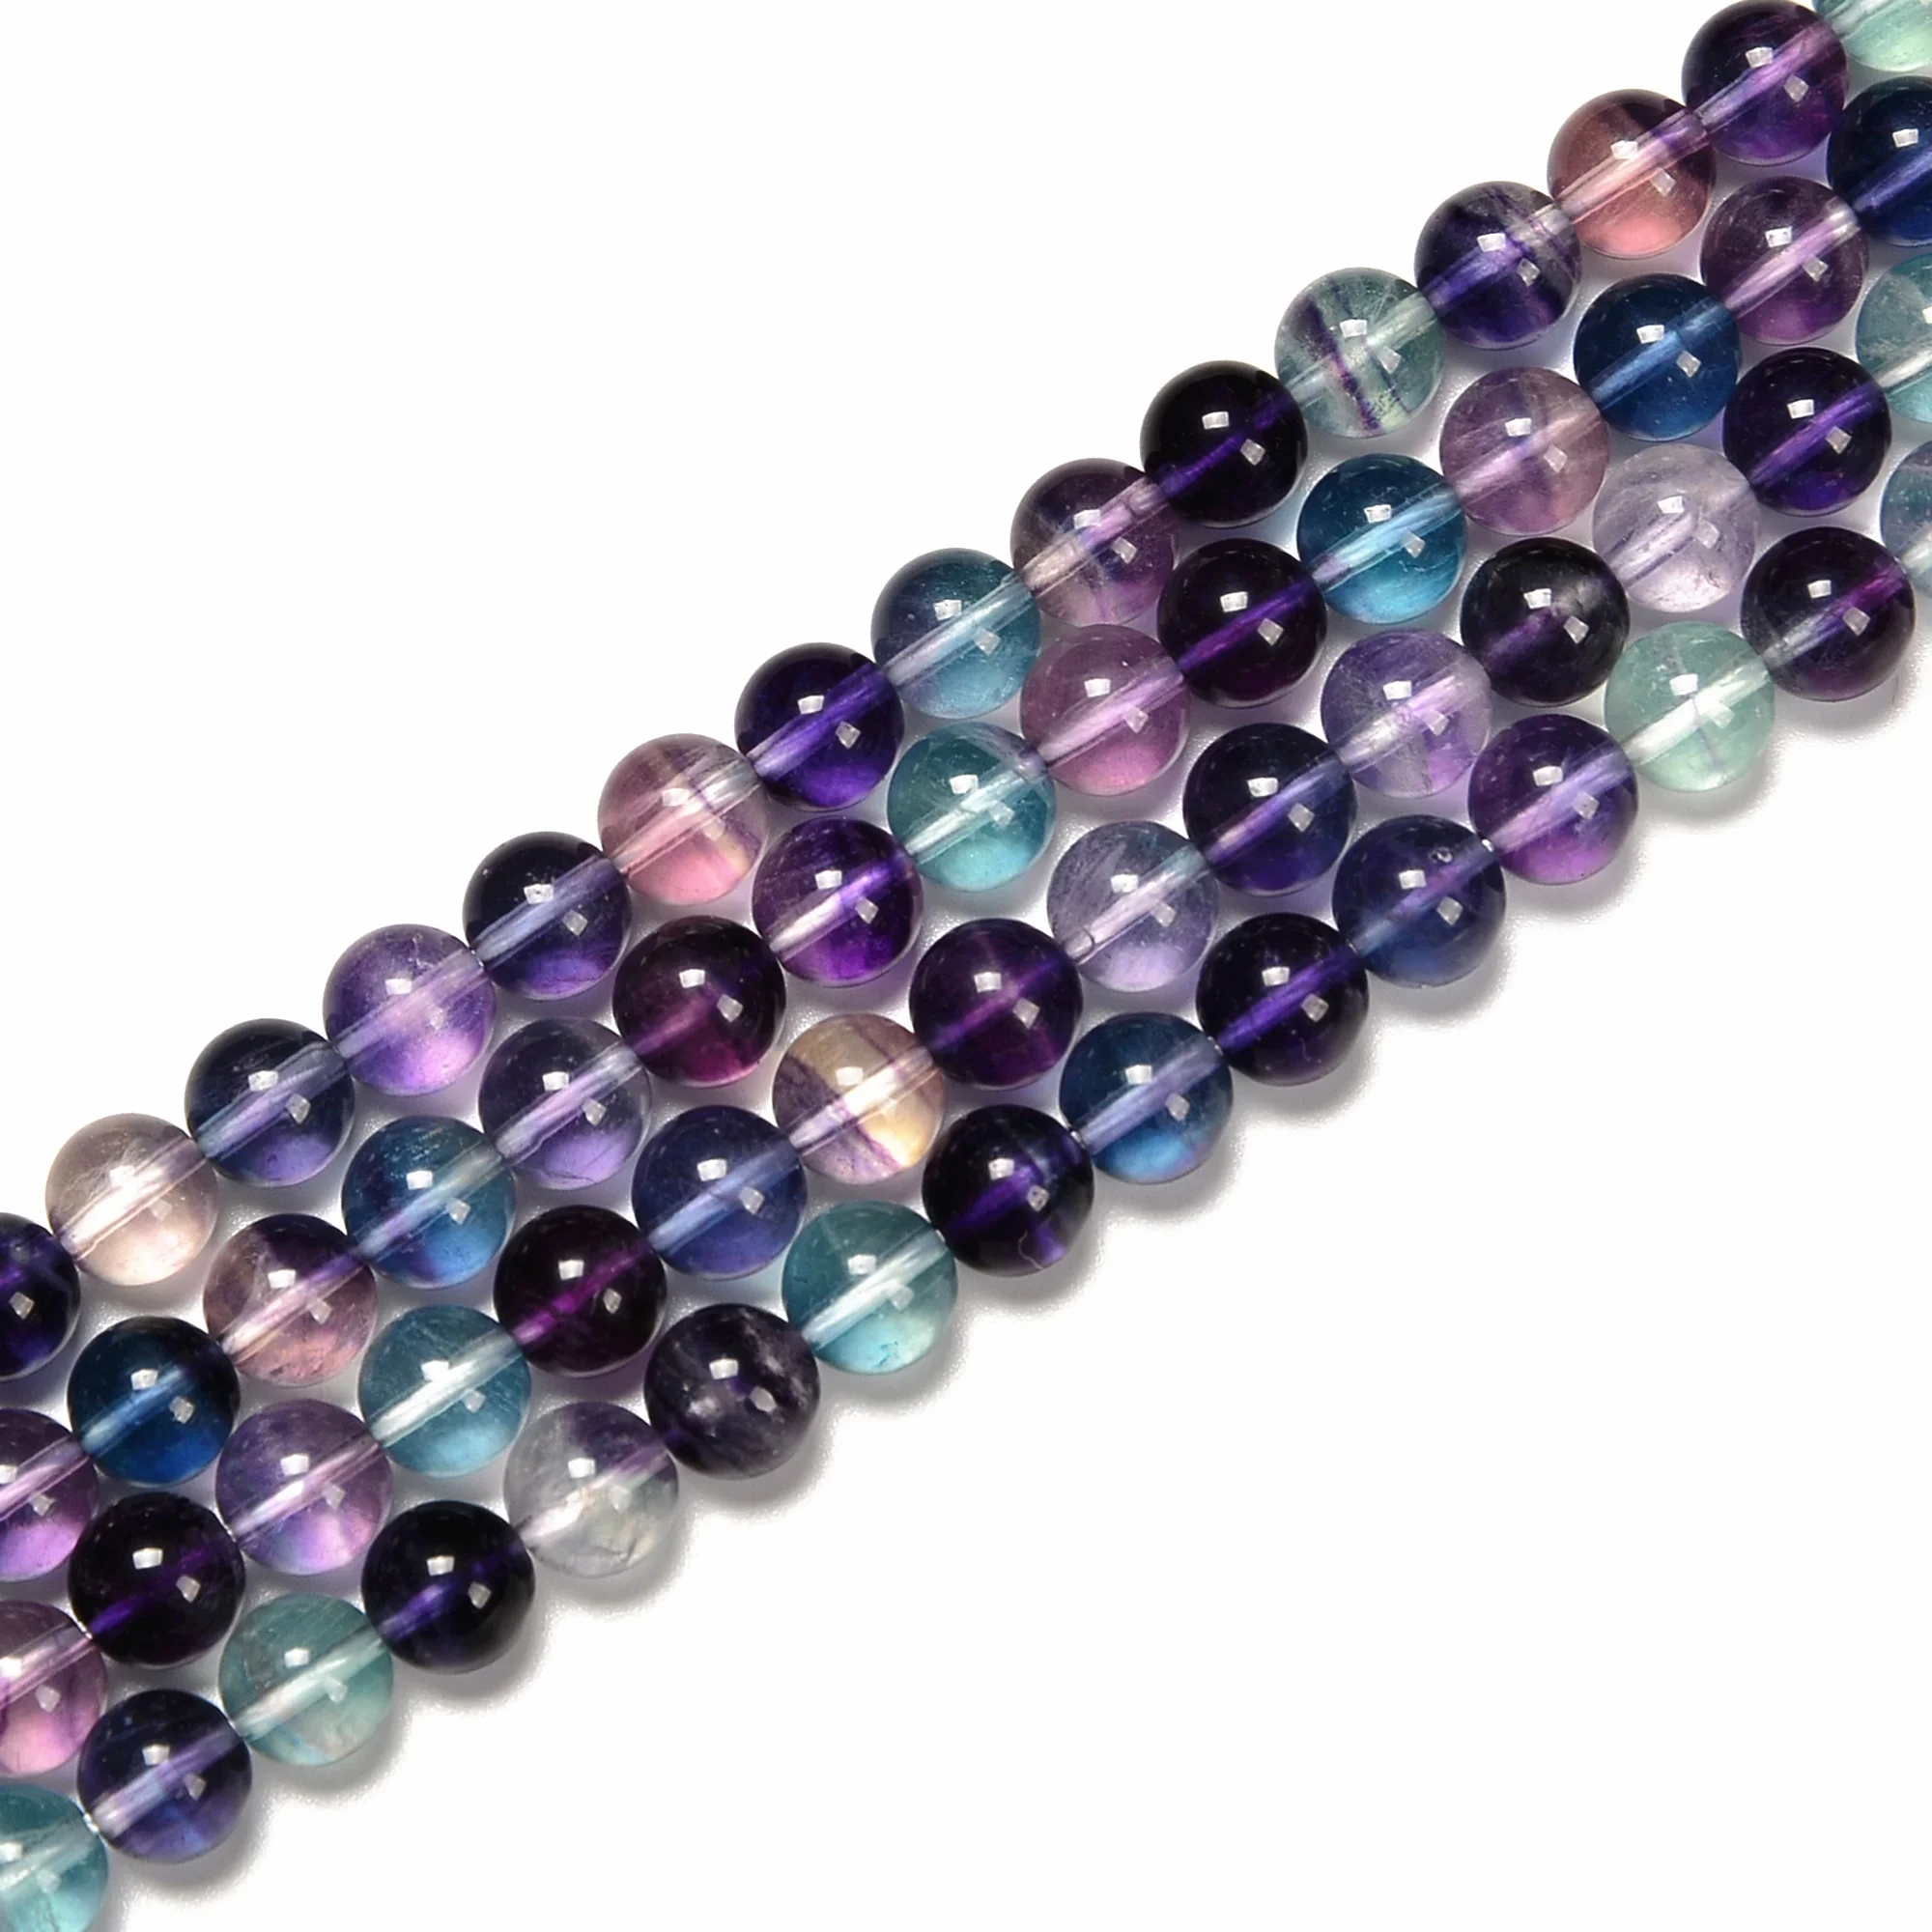 

Fluorite Nice A Grade 6mm 8mm 10mm Fluorite Smooth Round Gemstone Loose Beads for Jewelry Making